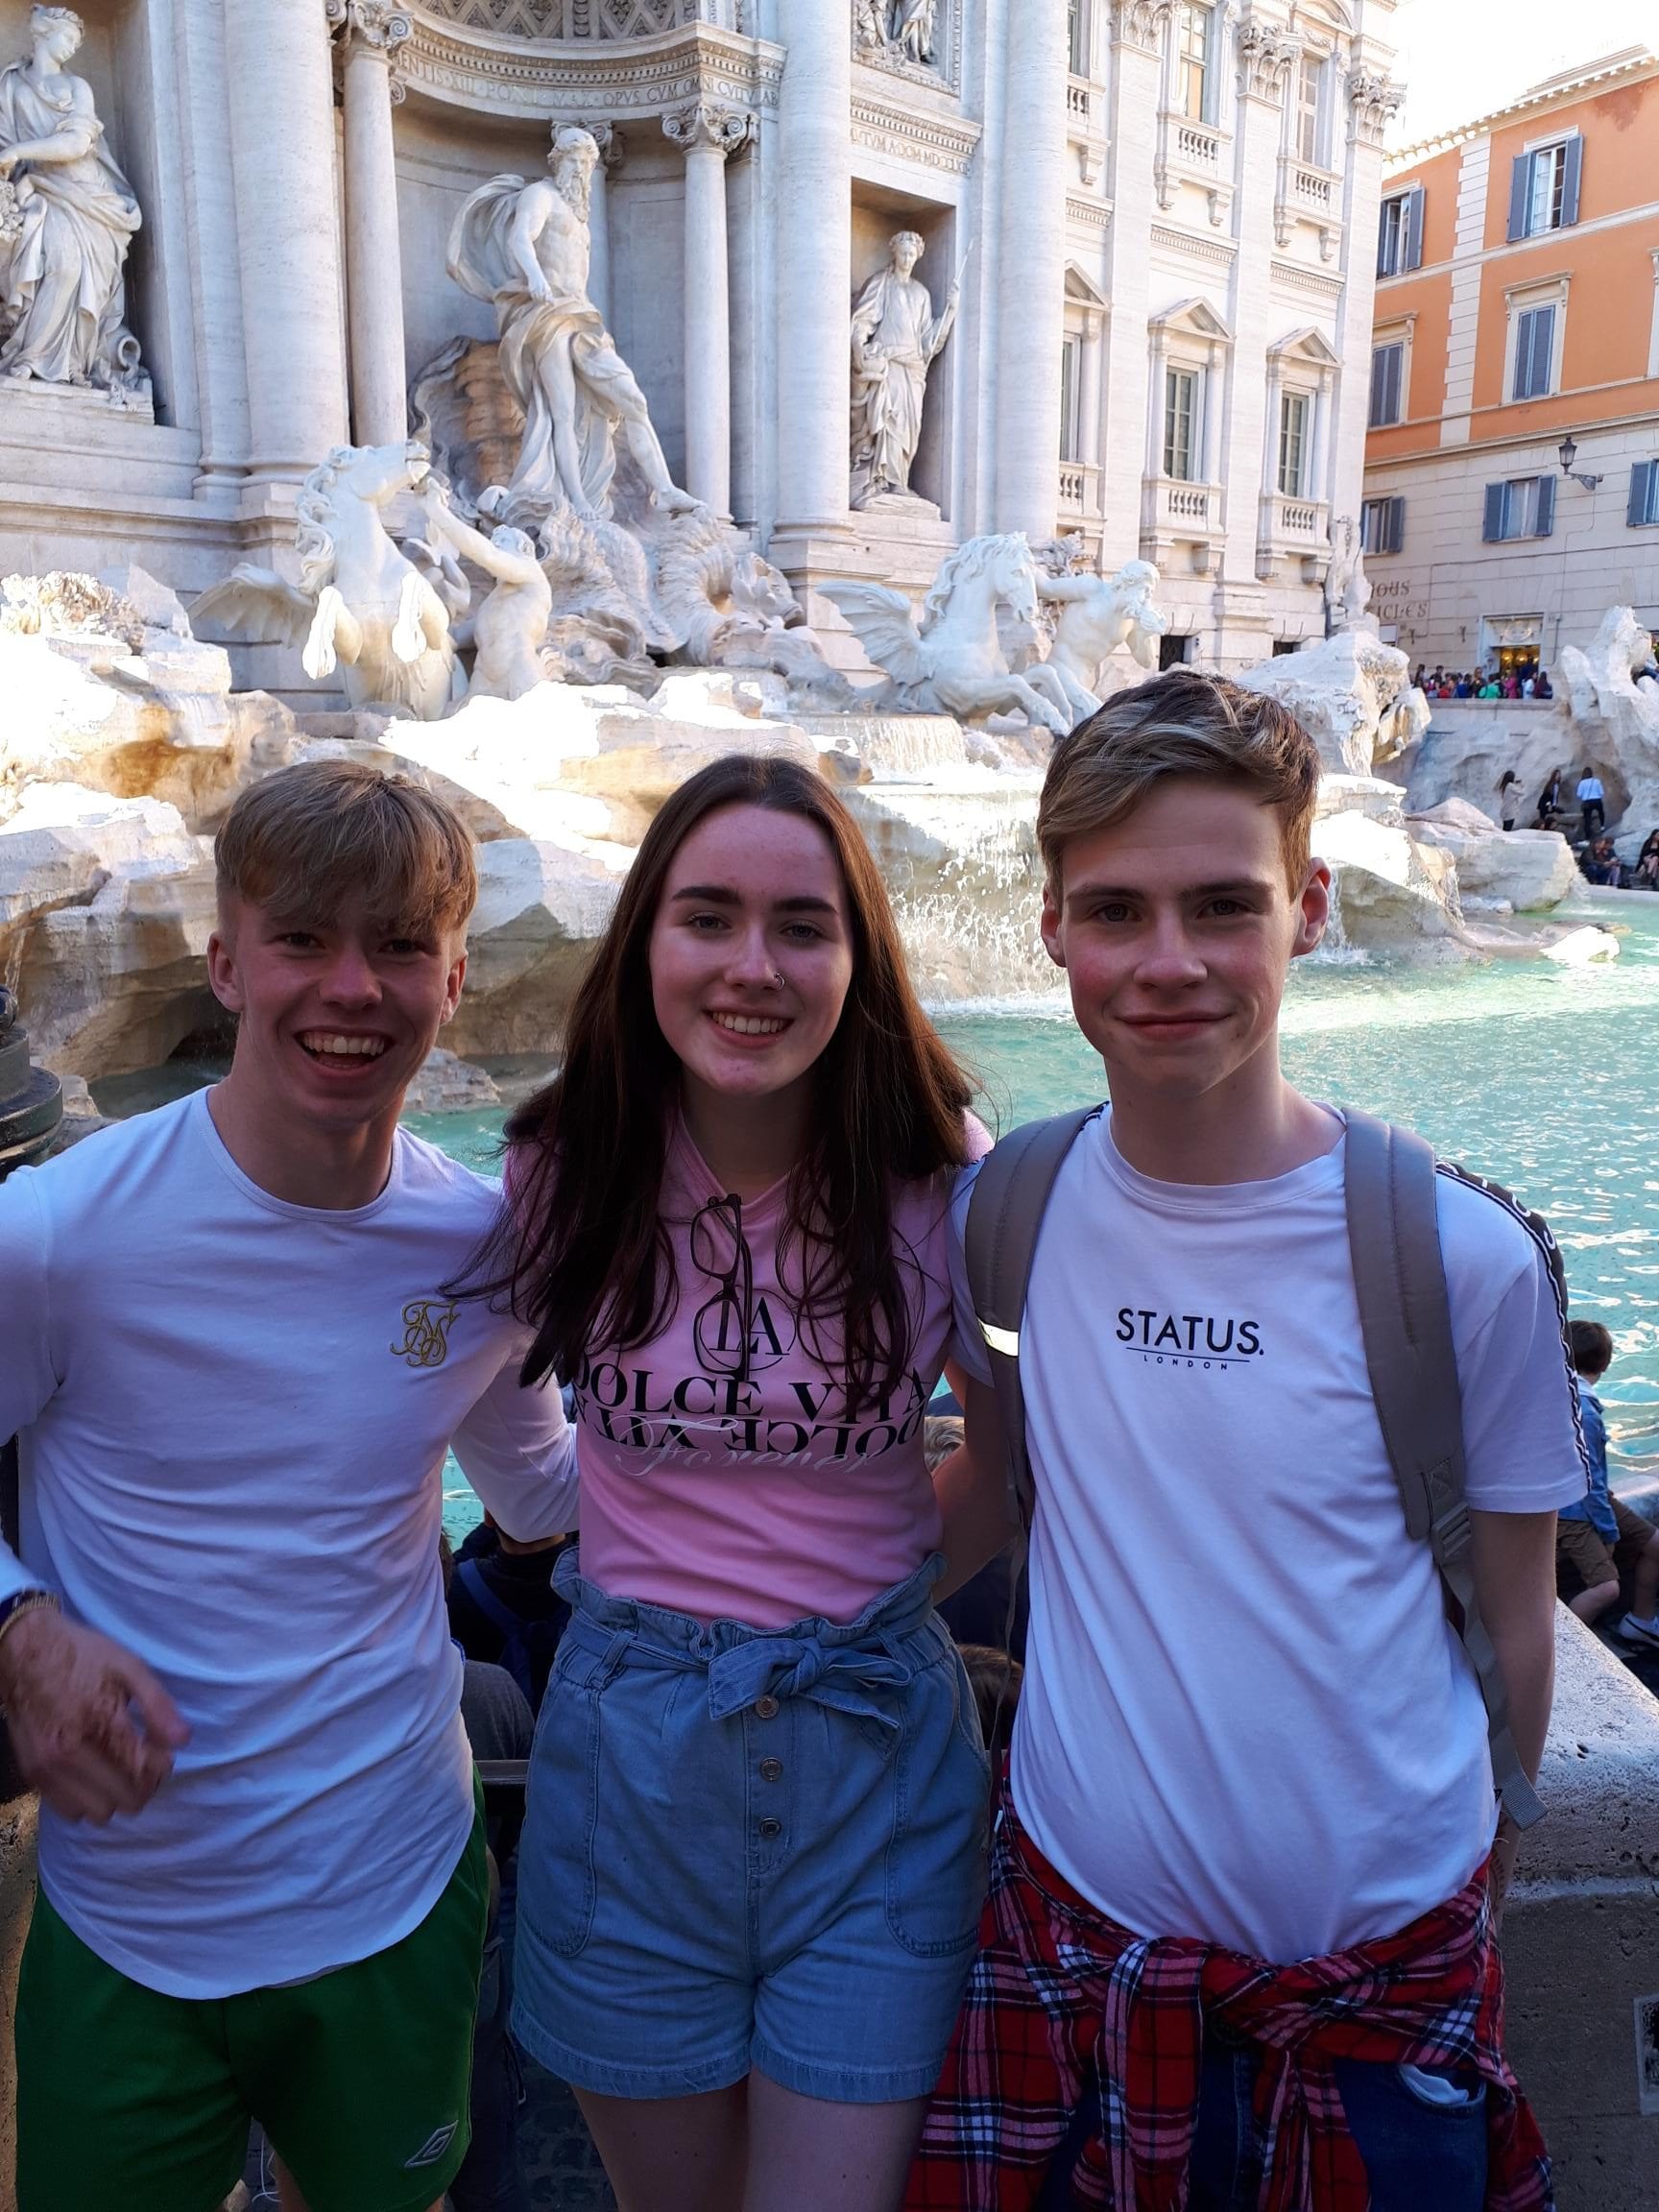 Dylan O'Shea, Fiona Kelly and Matthew O'Connor on school tour in Rome